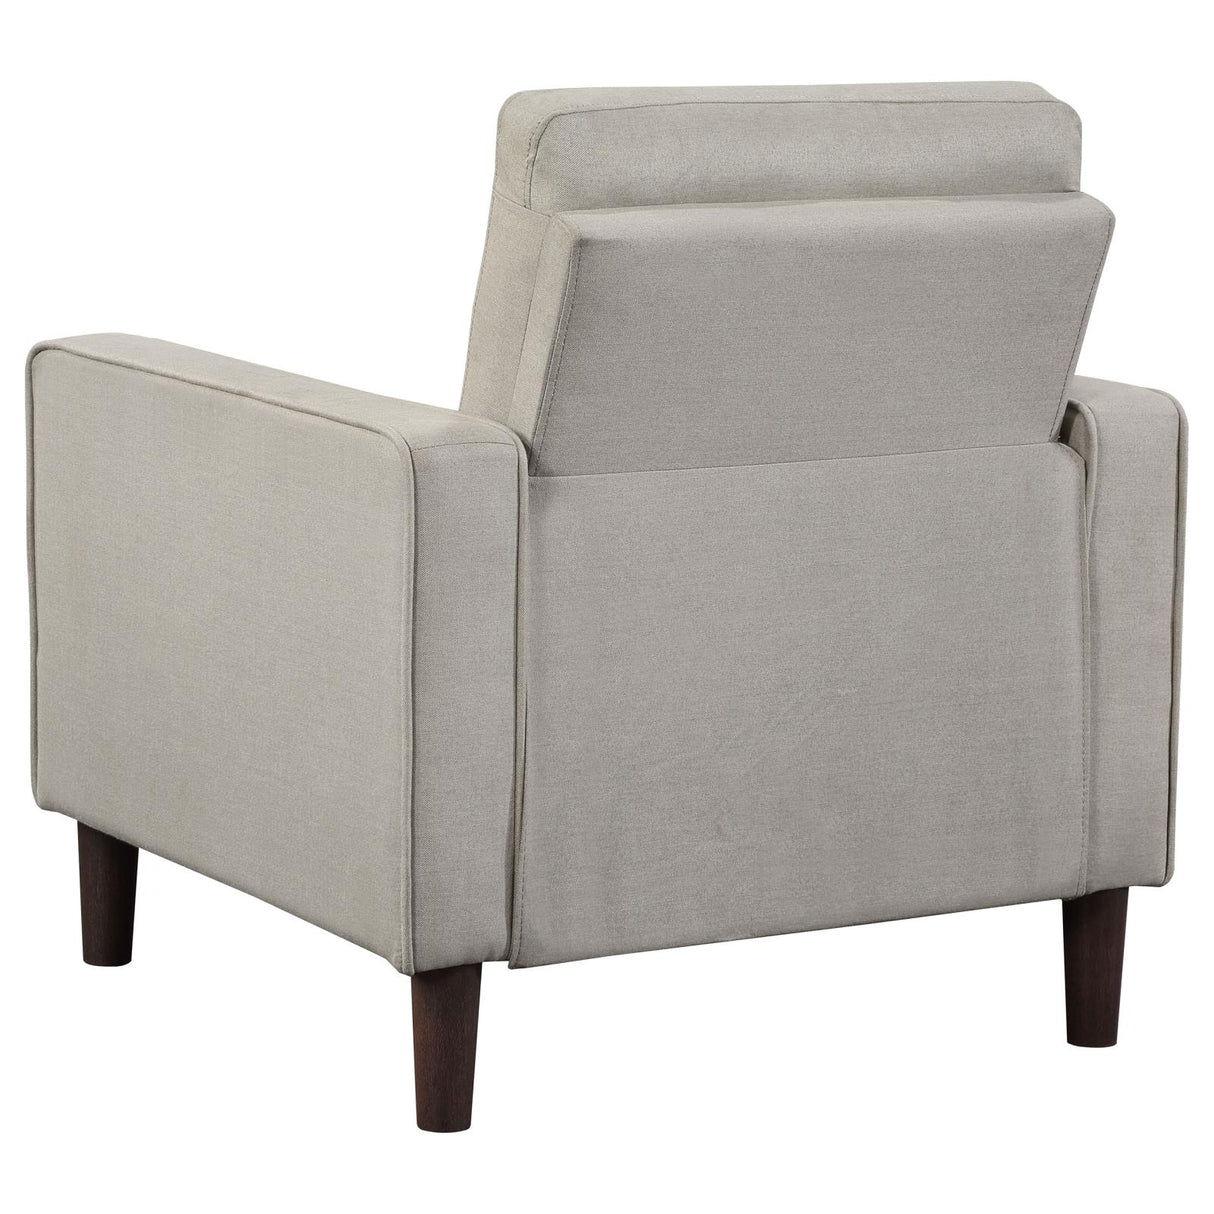 Bowen Upholstered Track Arms Tufted Chair Beige - 506787 - Luna Furniture